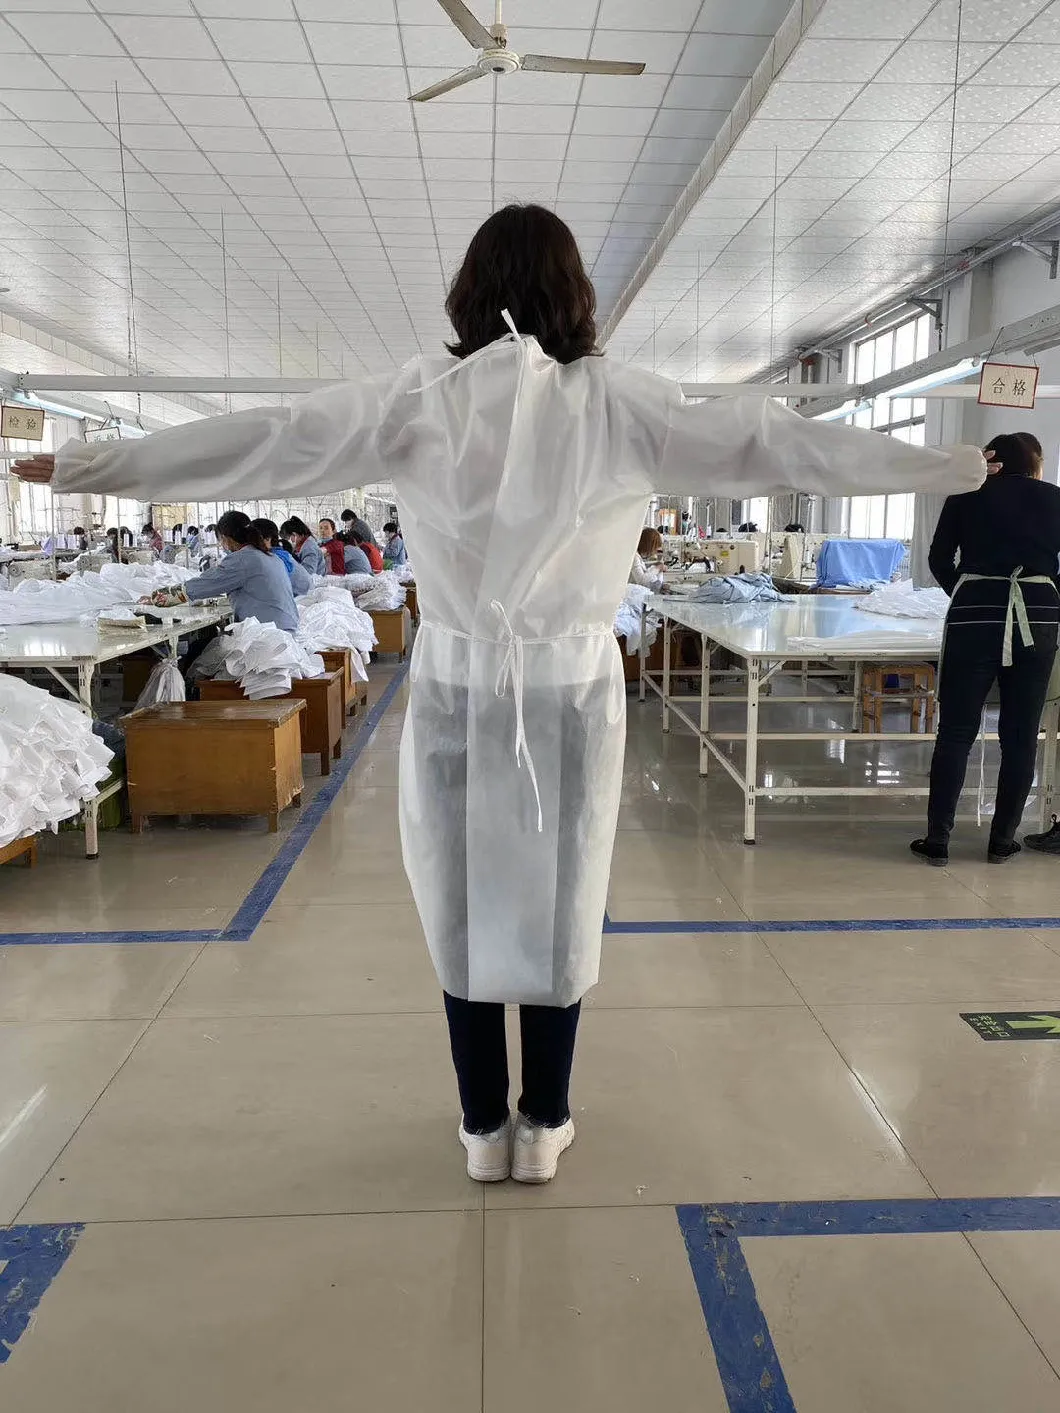 Waterproof/Plastic CPE/Poly/PE/Scrub/Operation/PP/SMS Nonwoven Disposable Protective Isolation Surgical Gown for Doctor/Surgeon/Patient/Visitor/Hospital Work